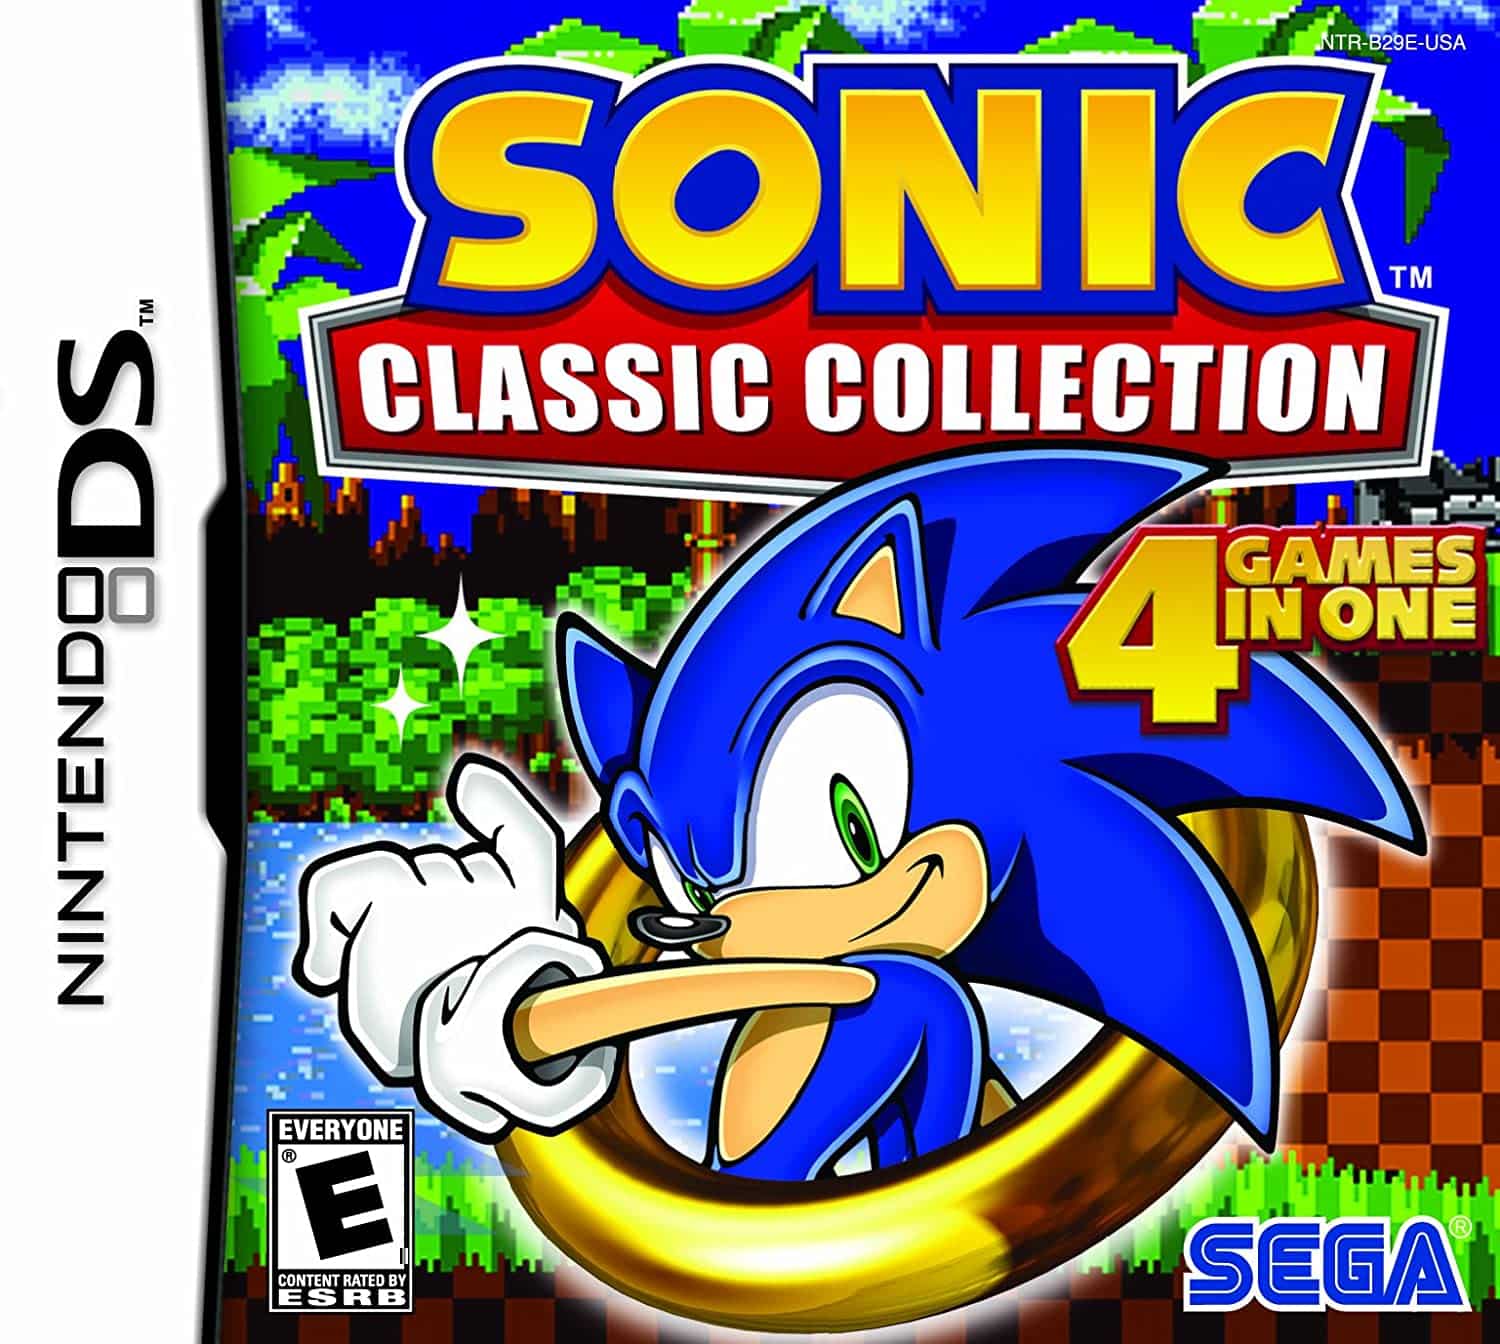 Sonic Classic Collection player count stats